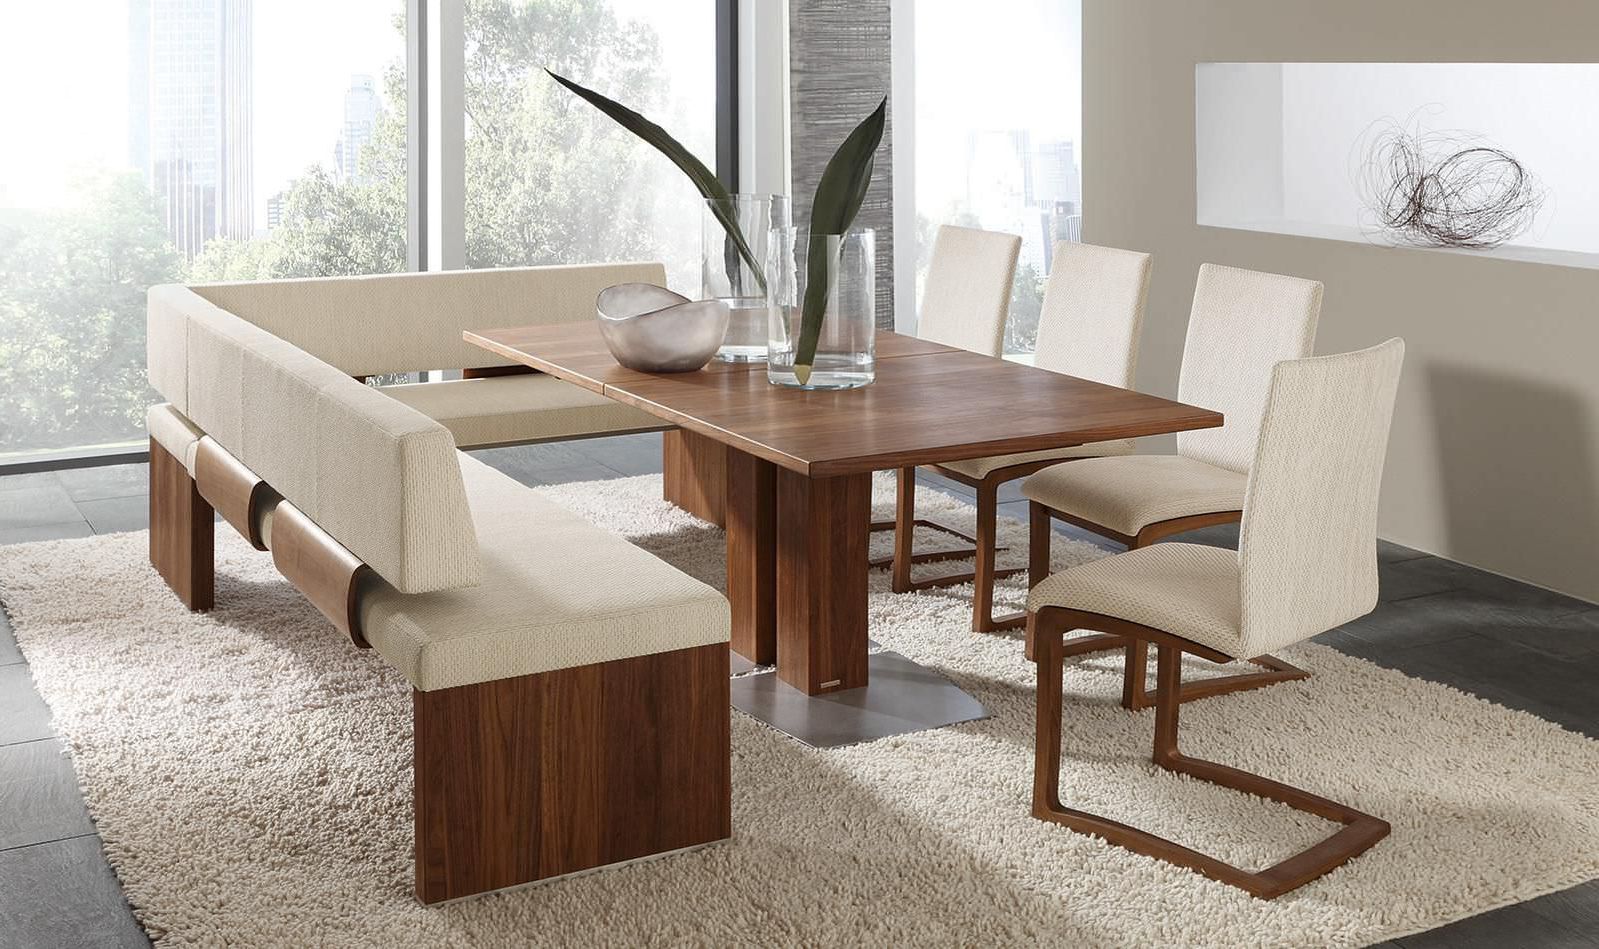 2017 Contemporary Dining Table / Wooden / Rectangular – Et364 Intended For Contemporary Rectangular Dining Tables (View 1 of 30)